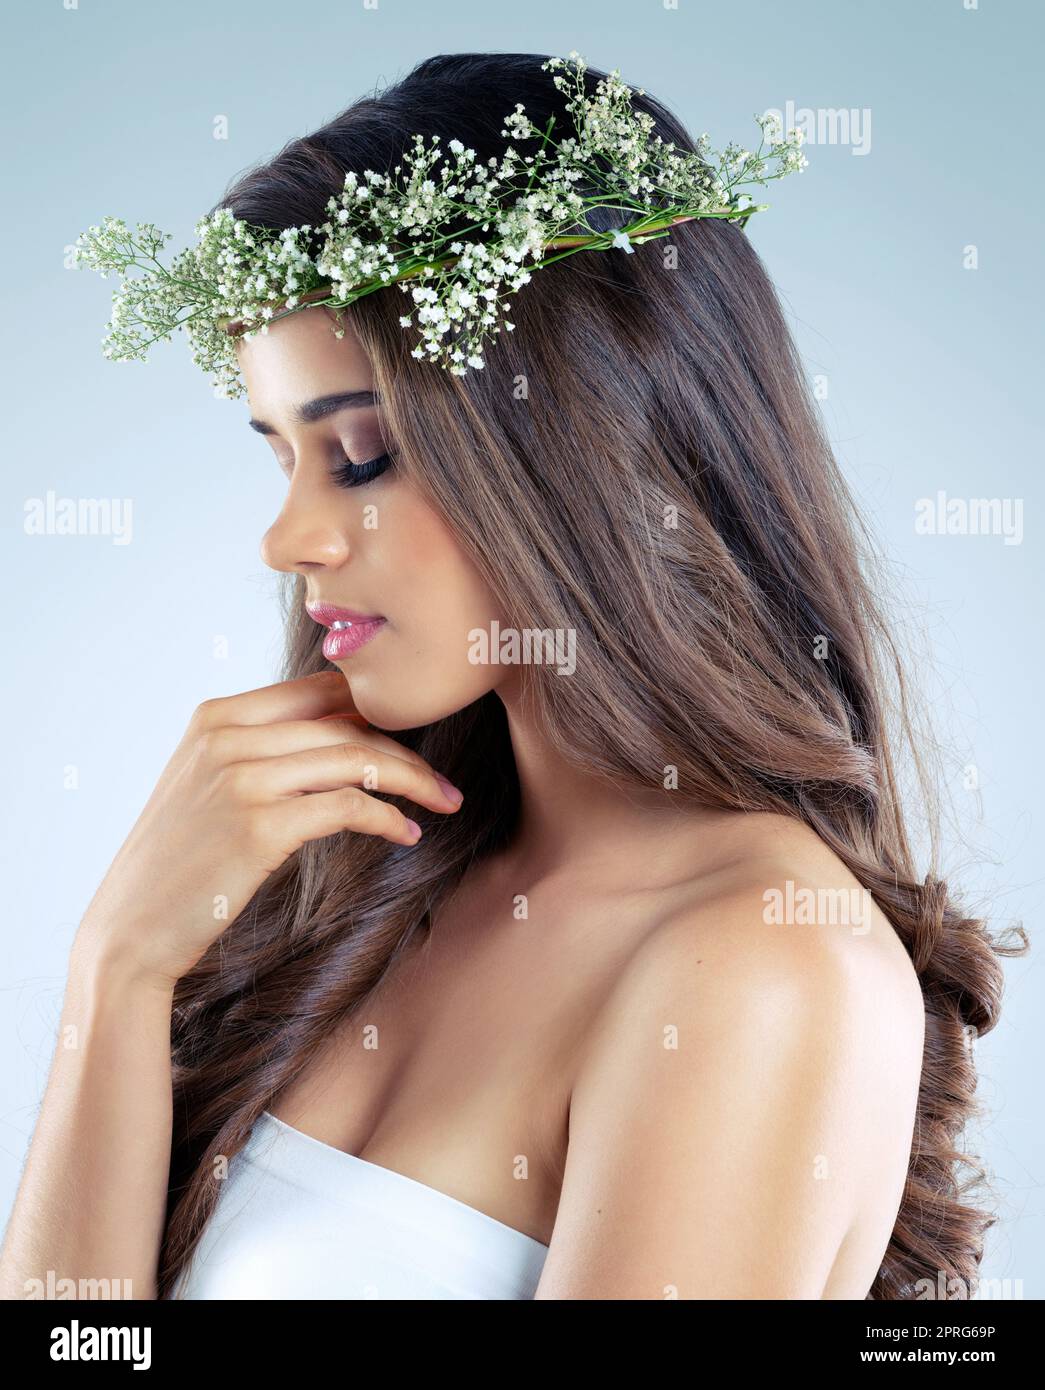 Shes got the softest skin imaginable. Studio shot of a beautiful young woman wearing a floral head wreath. Stock Photo